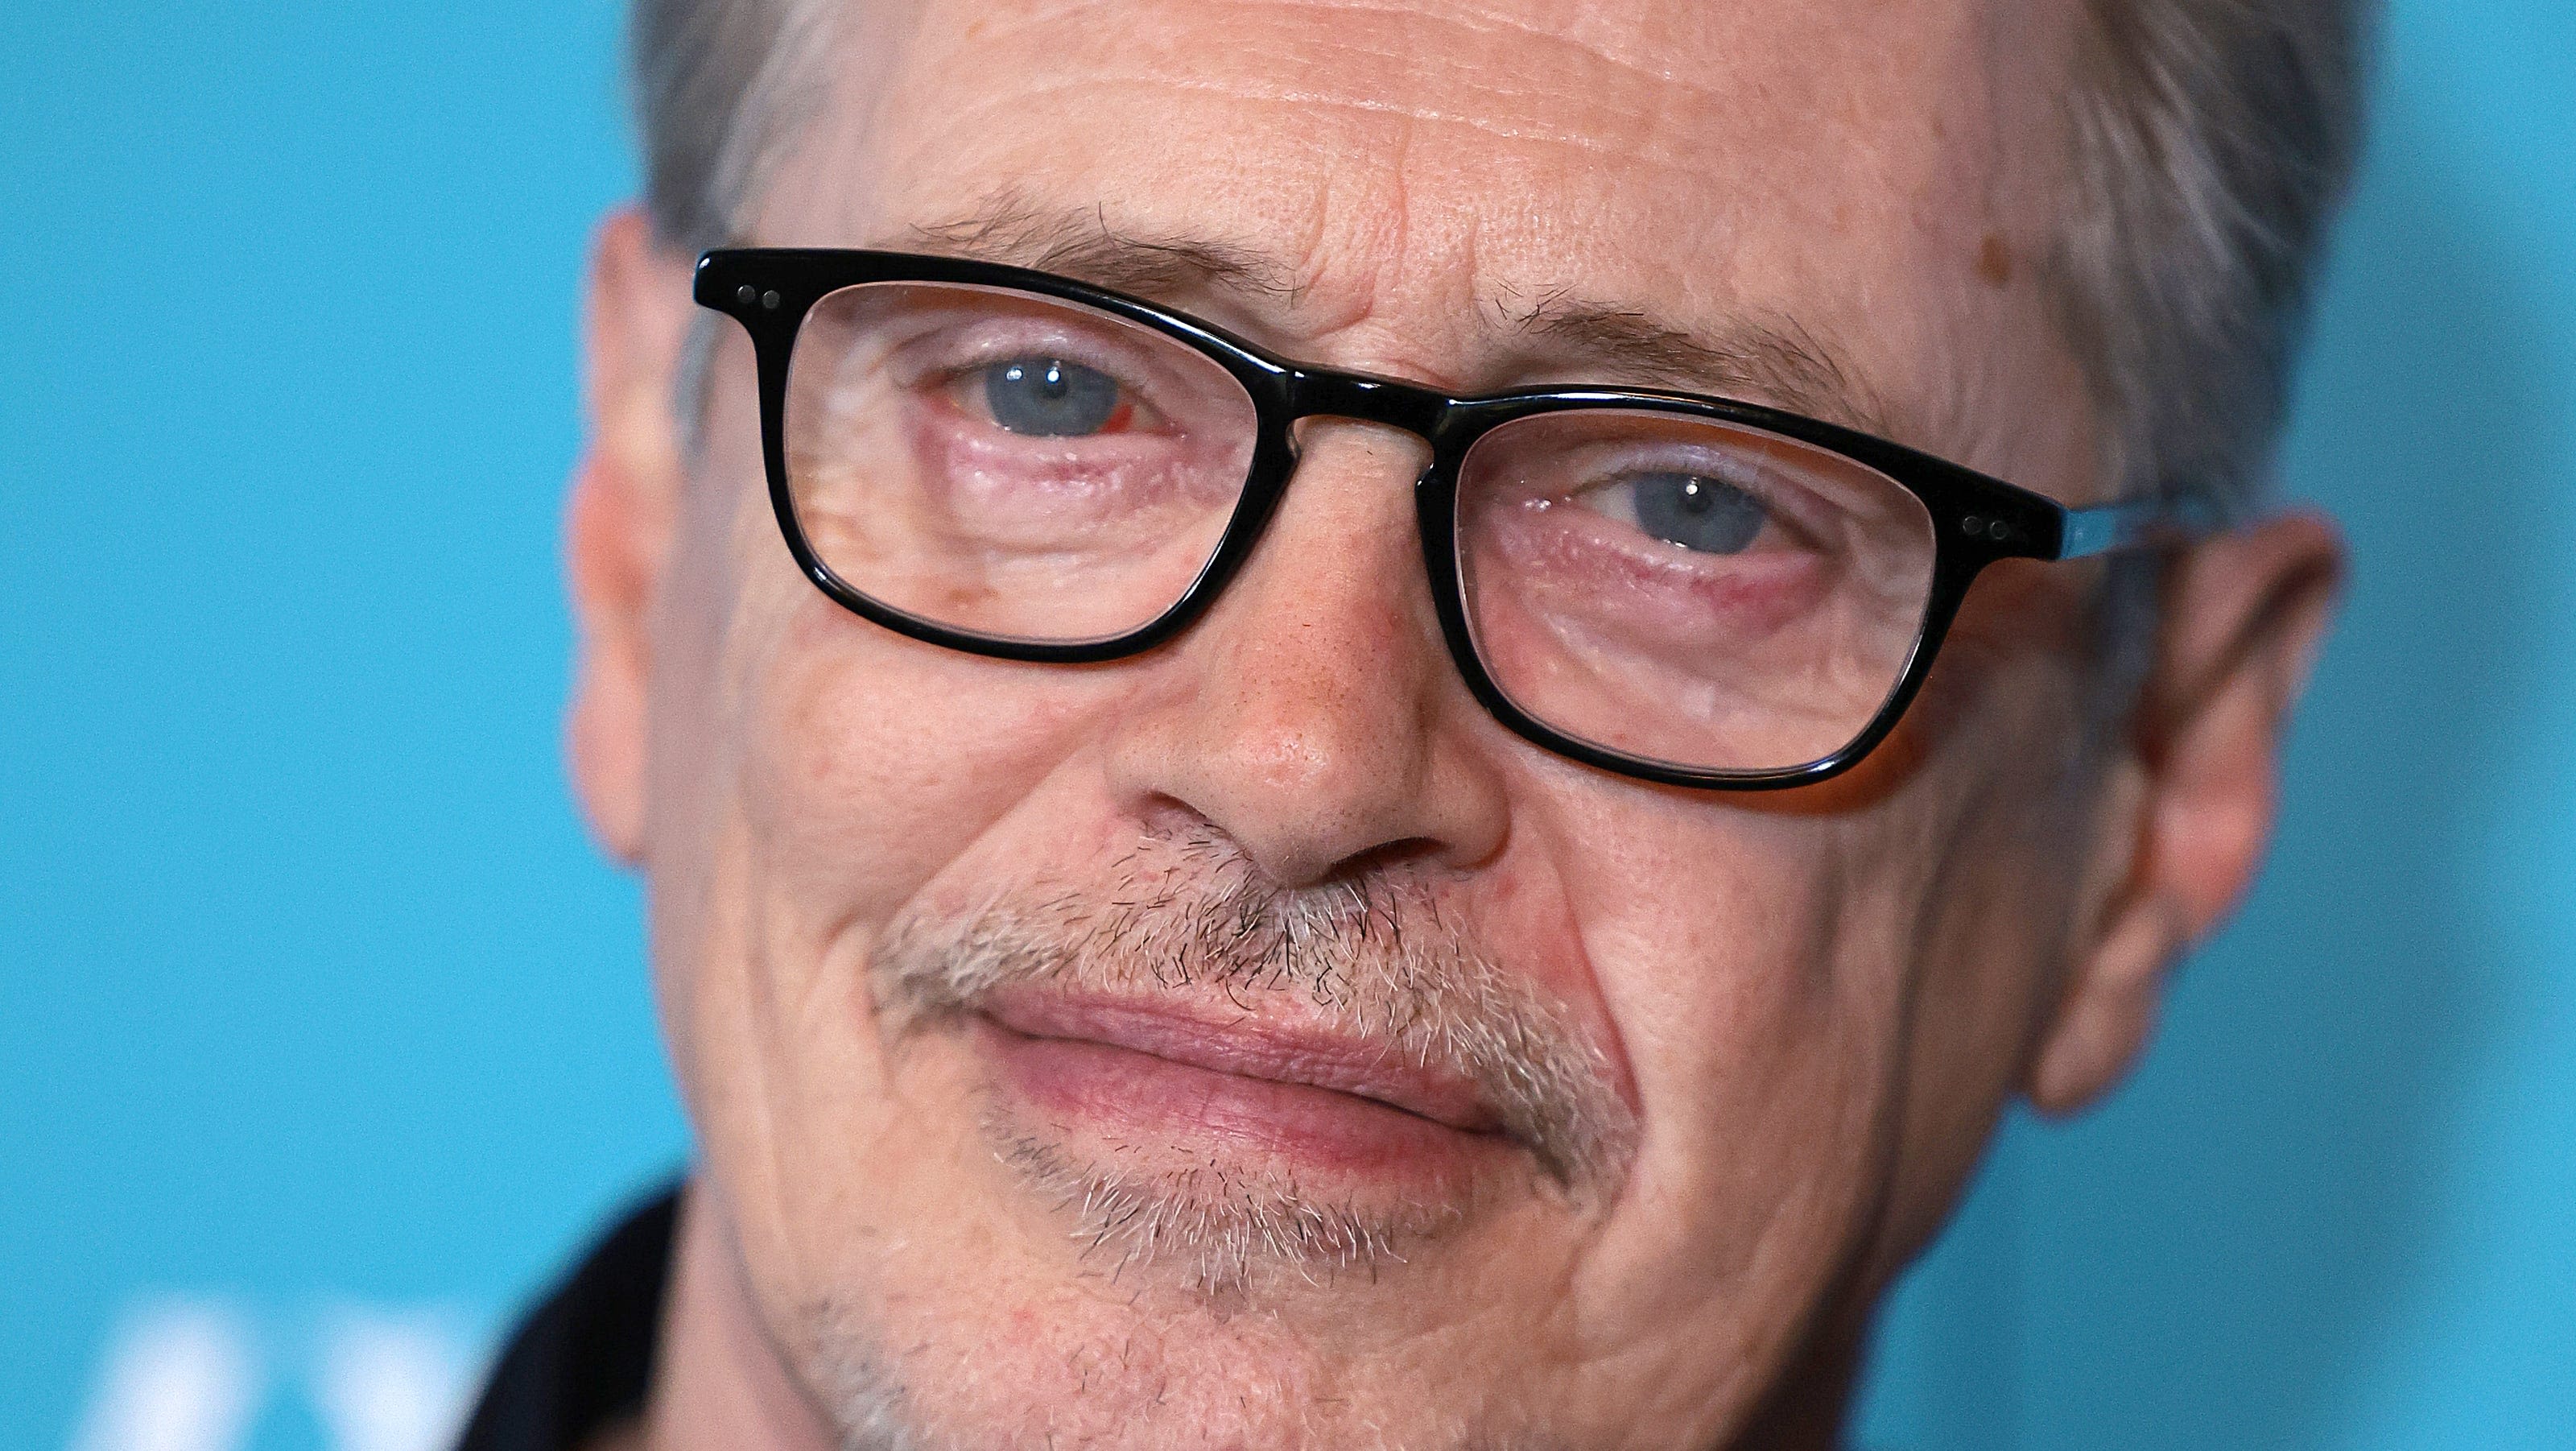 Steve Buscemi is 'OK' after actor was attacked during walk in New York City